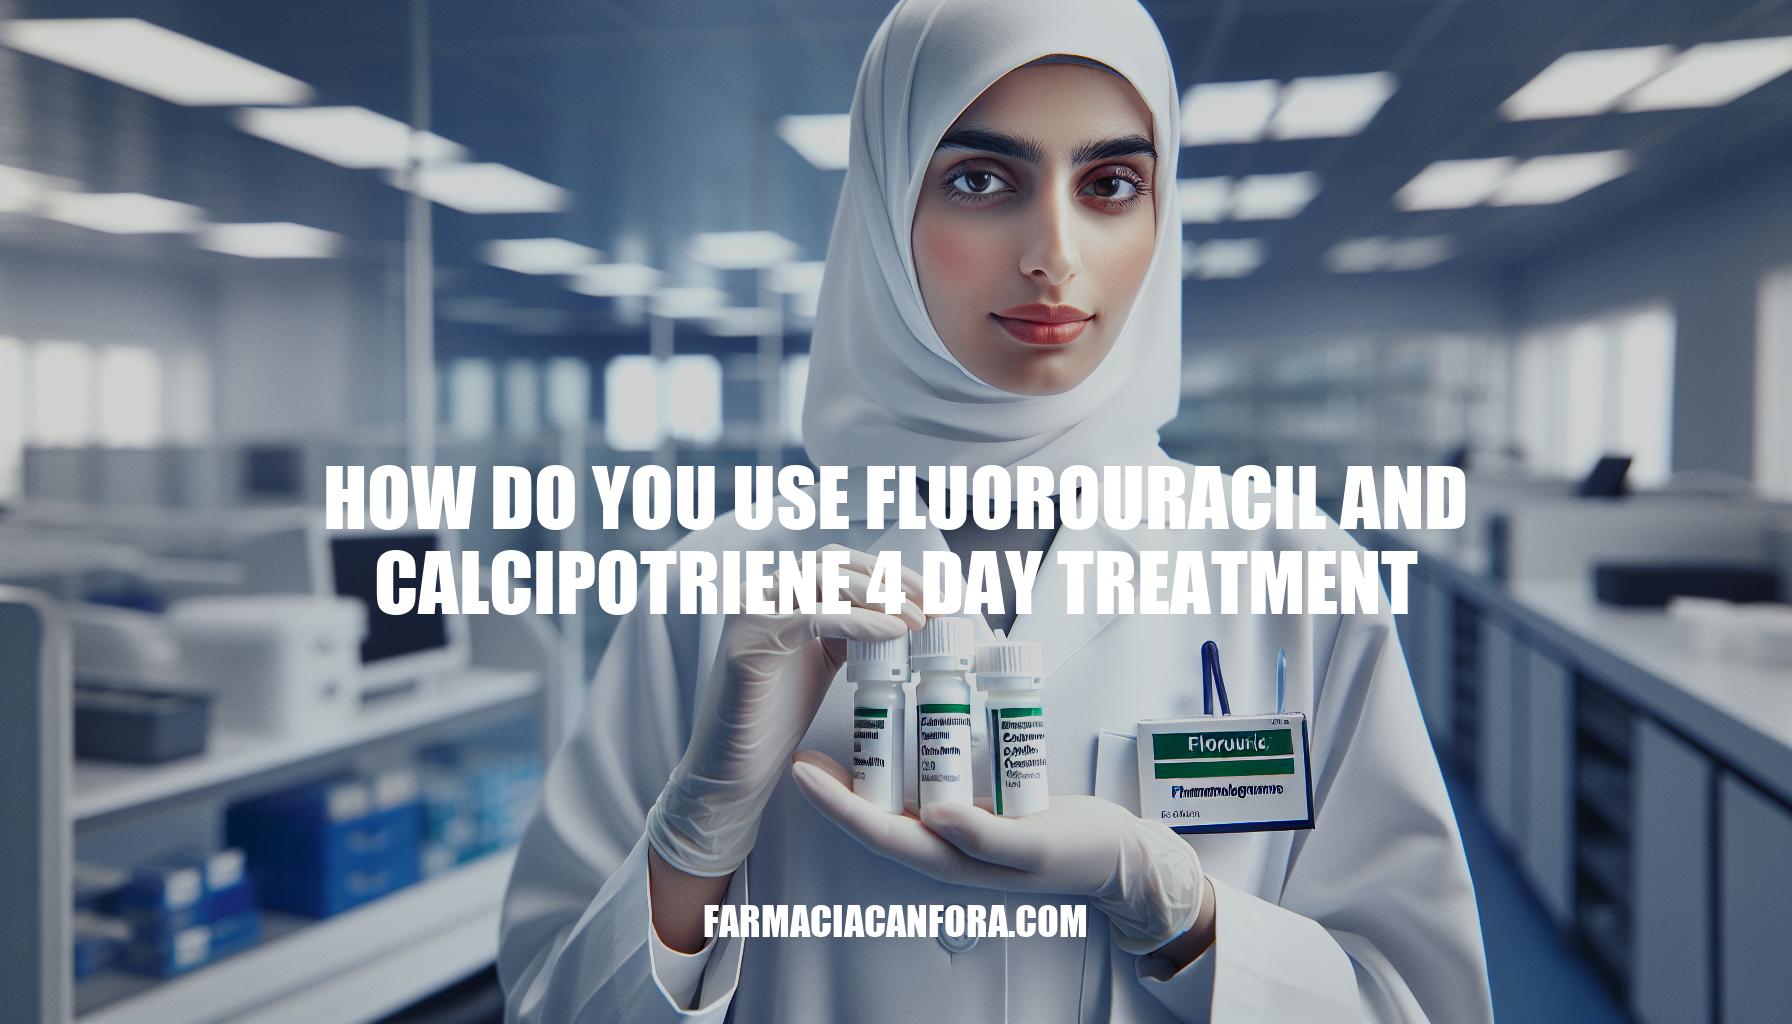 How to Use Fluorouracil and Calcipotriene 4 Day Treatment